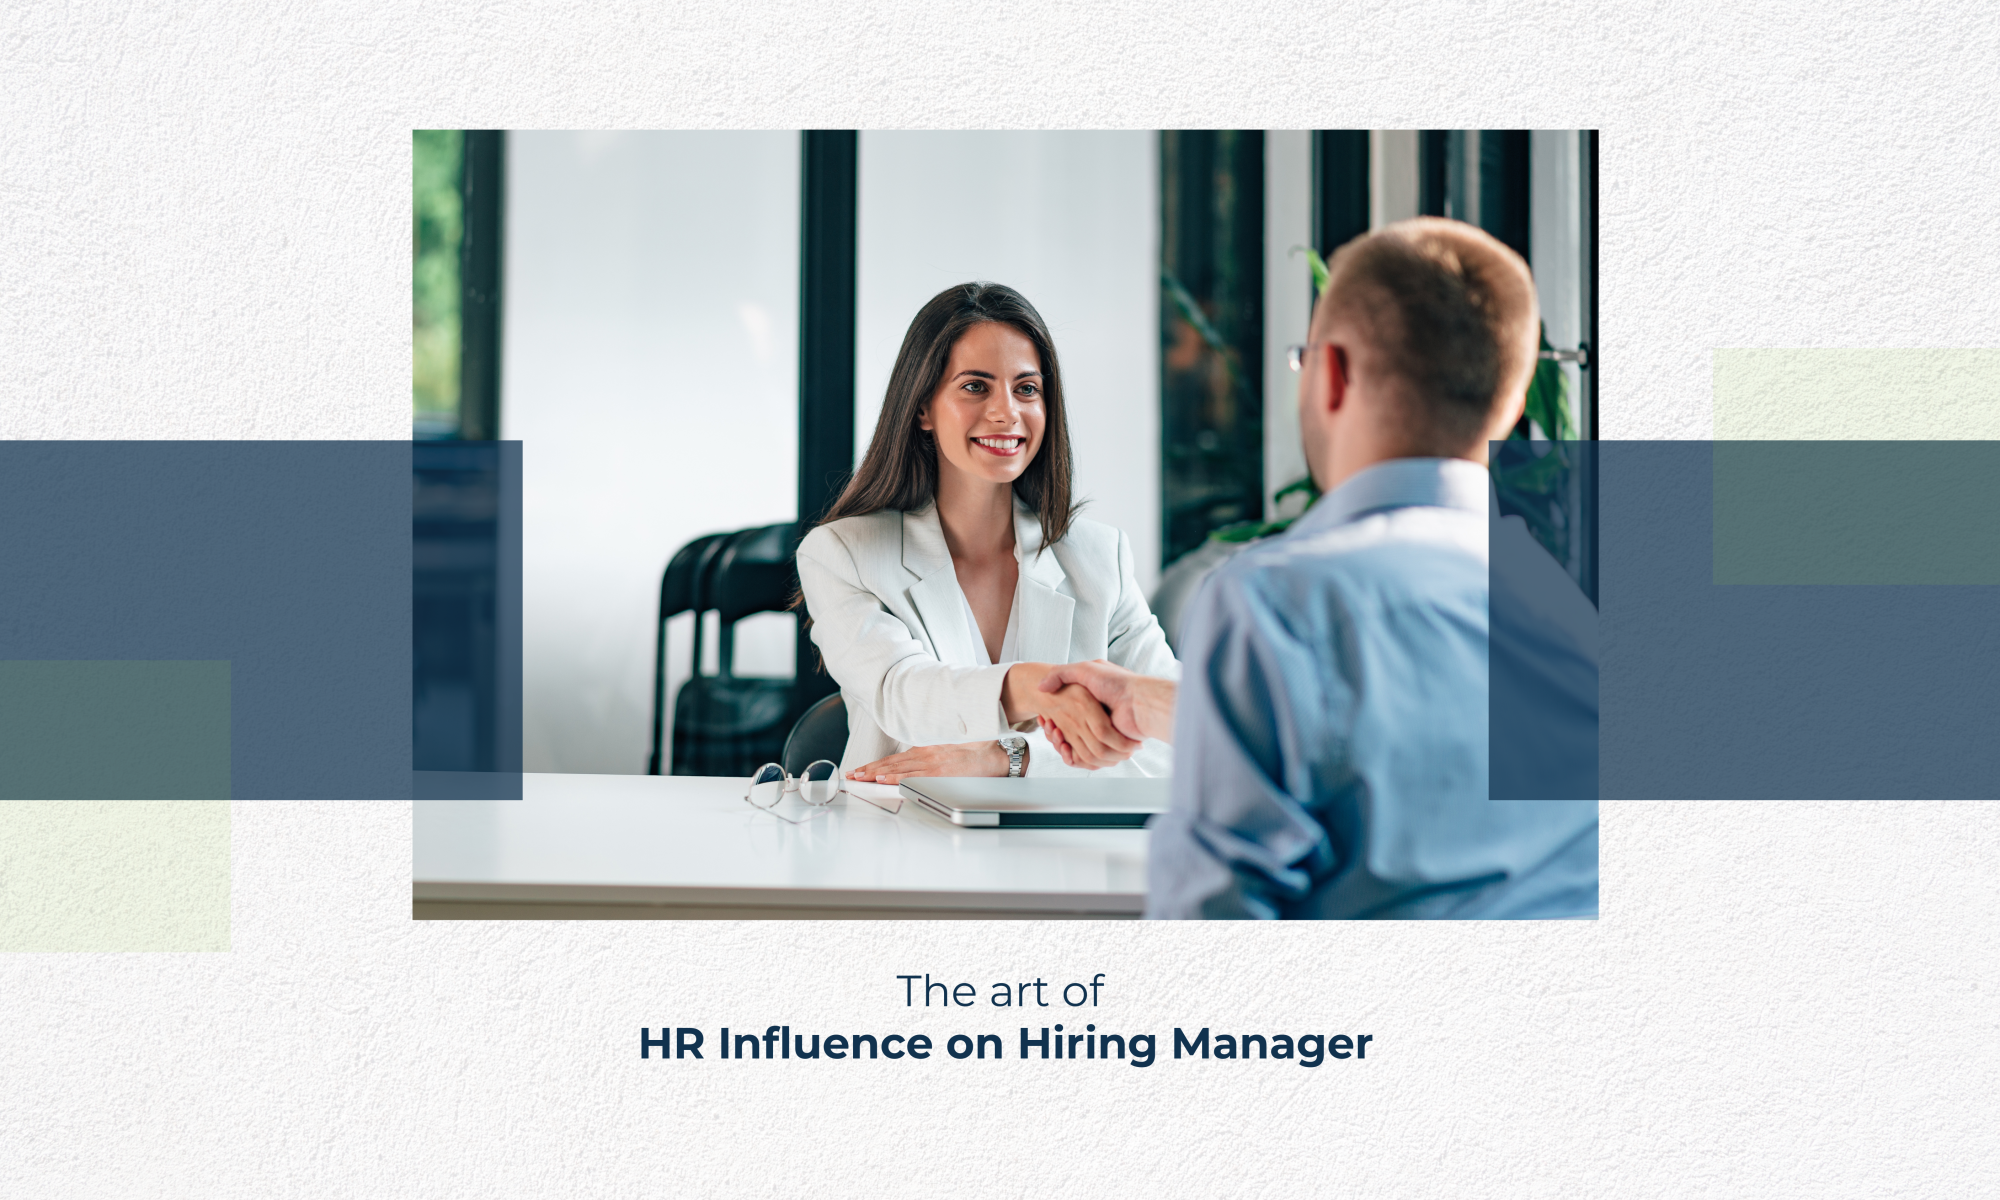 hr influence on hiring managers